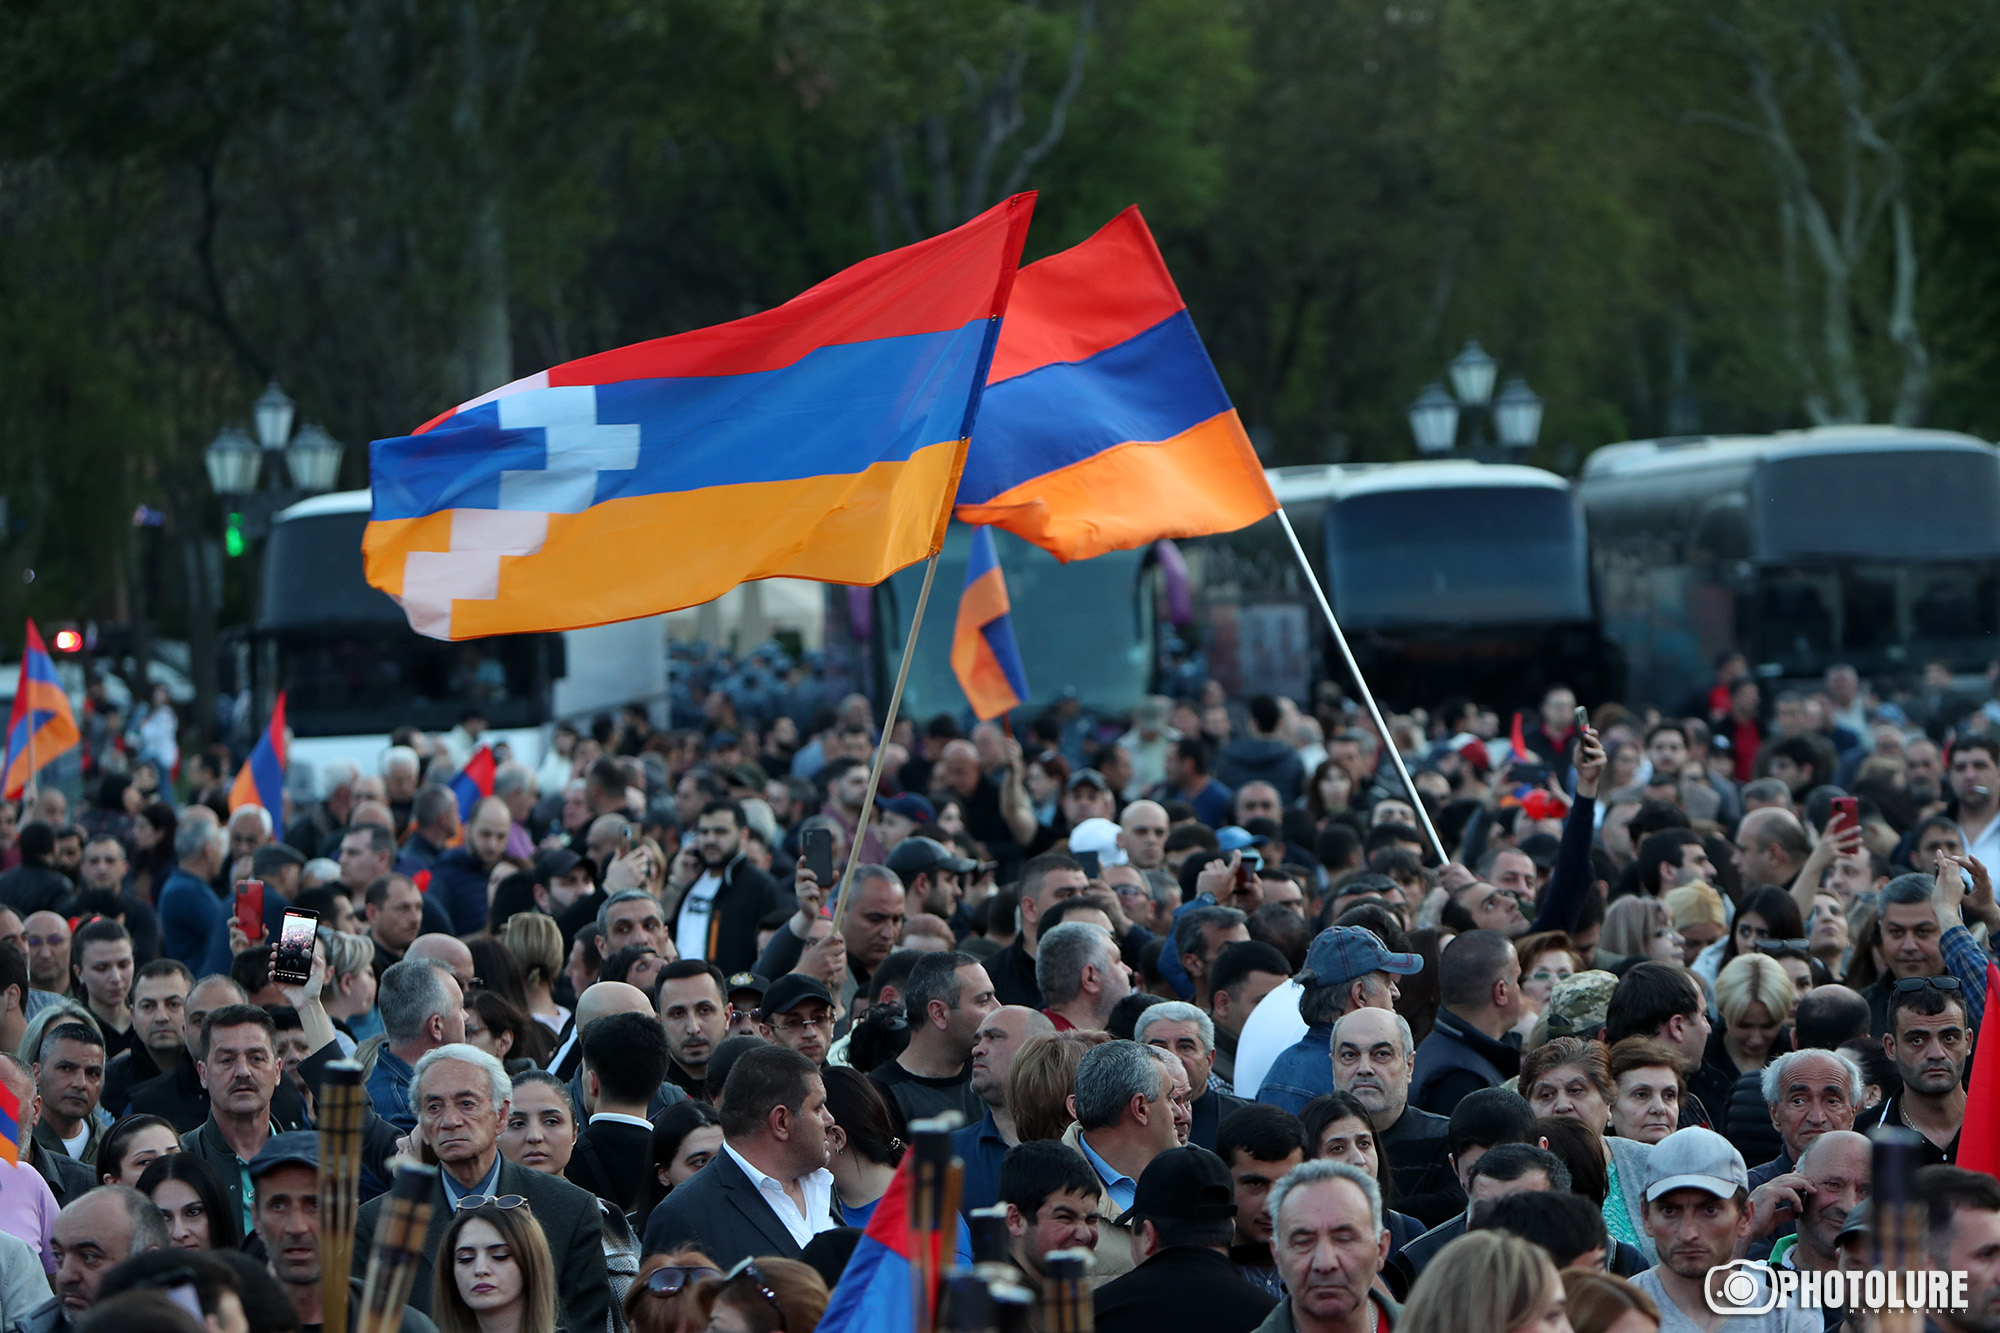 Growing pessimism in Armenia about country’s direction, new poll shows